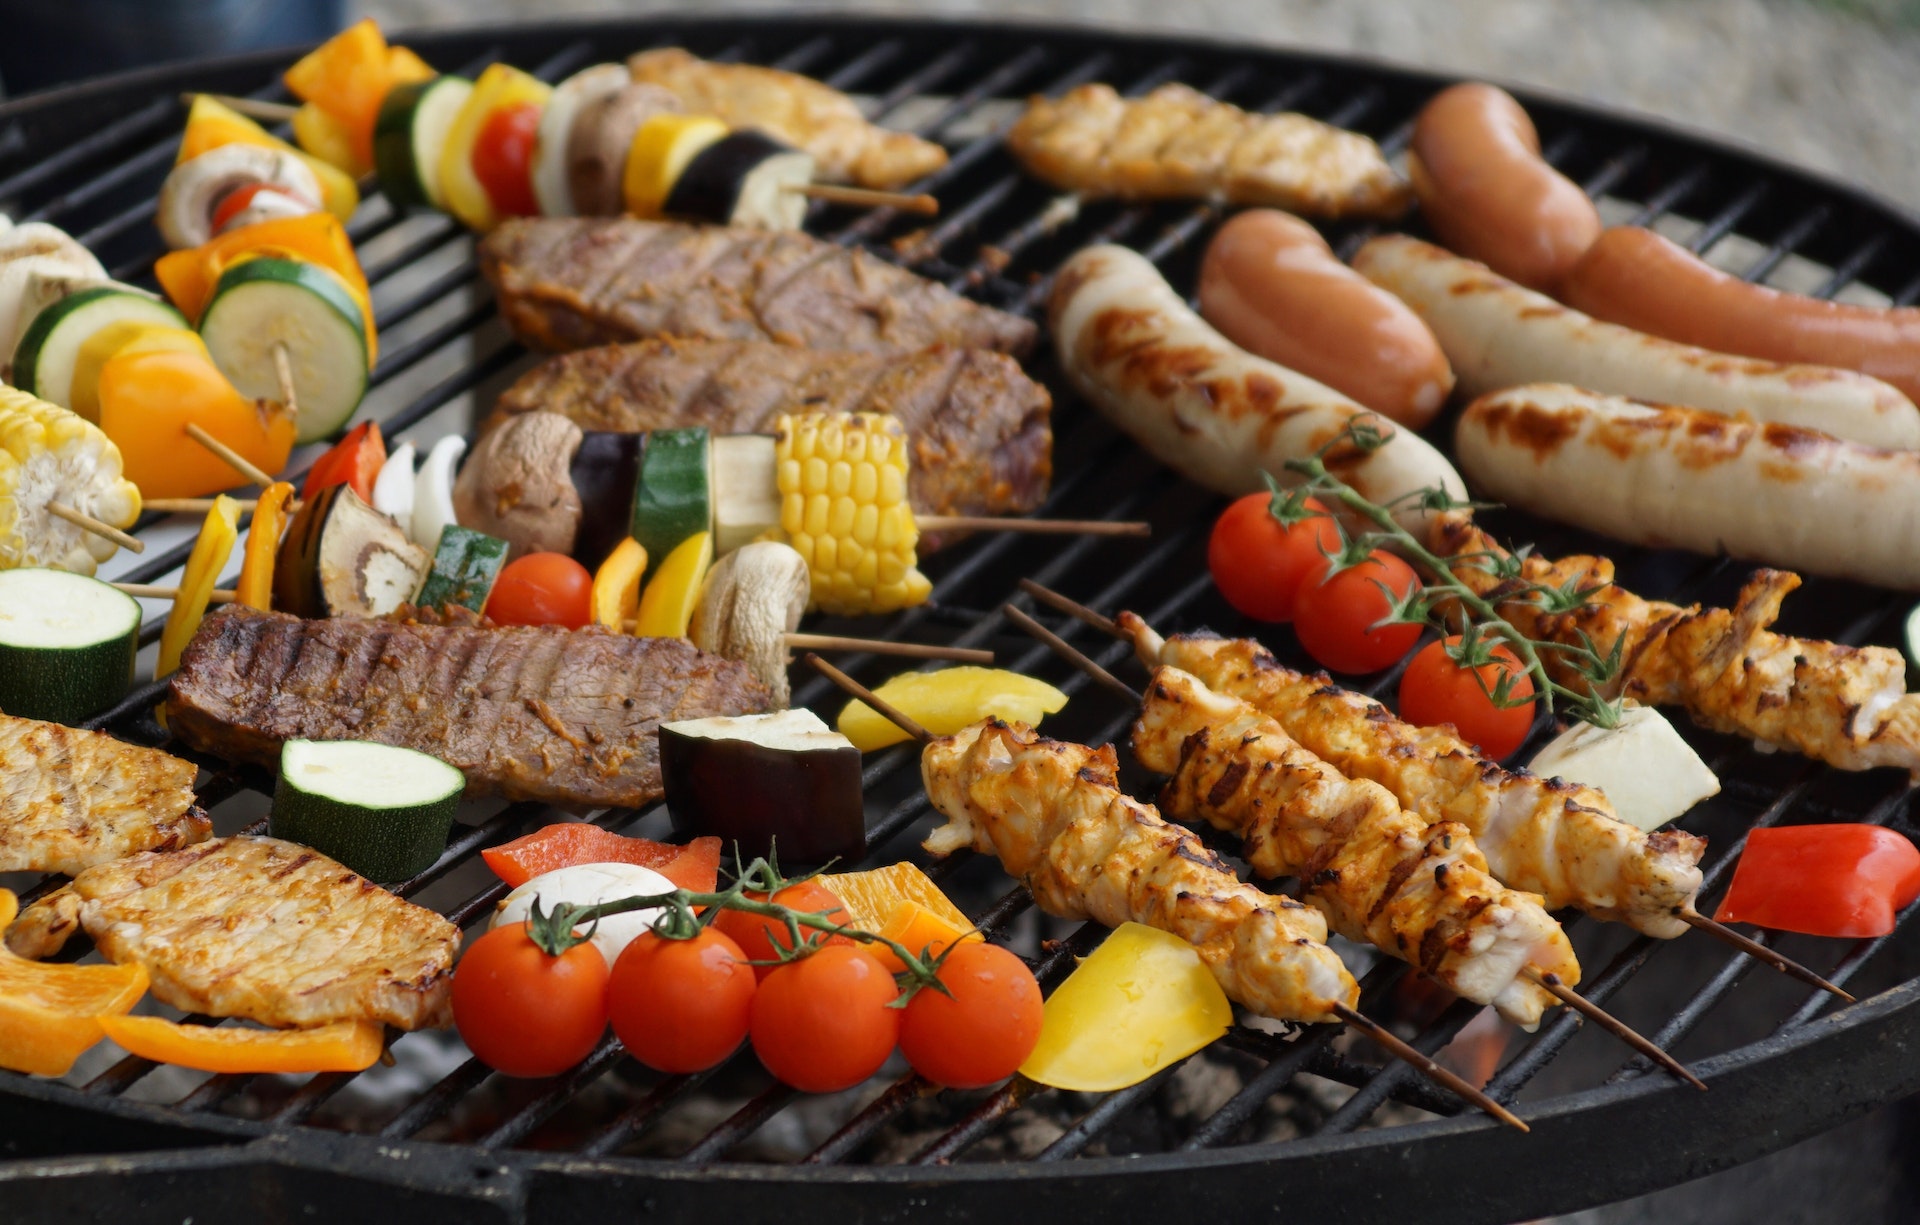 The Healthiest Proteins for a Summer Barbecue